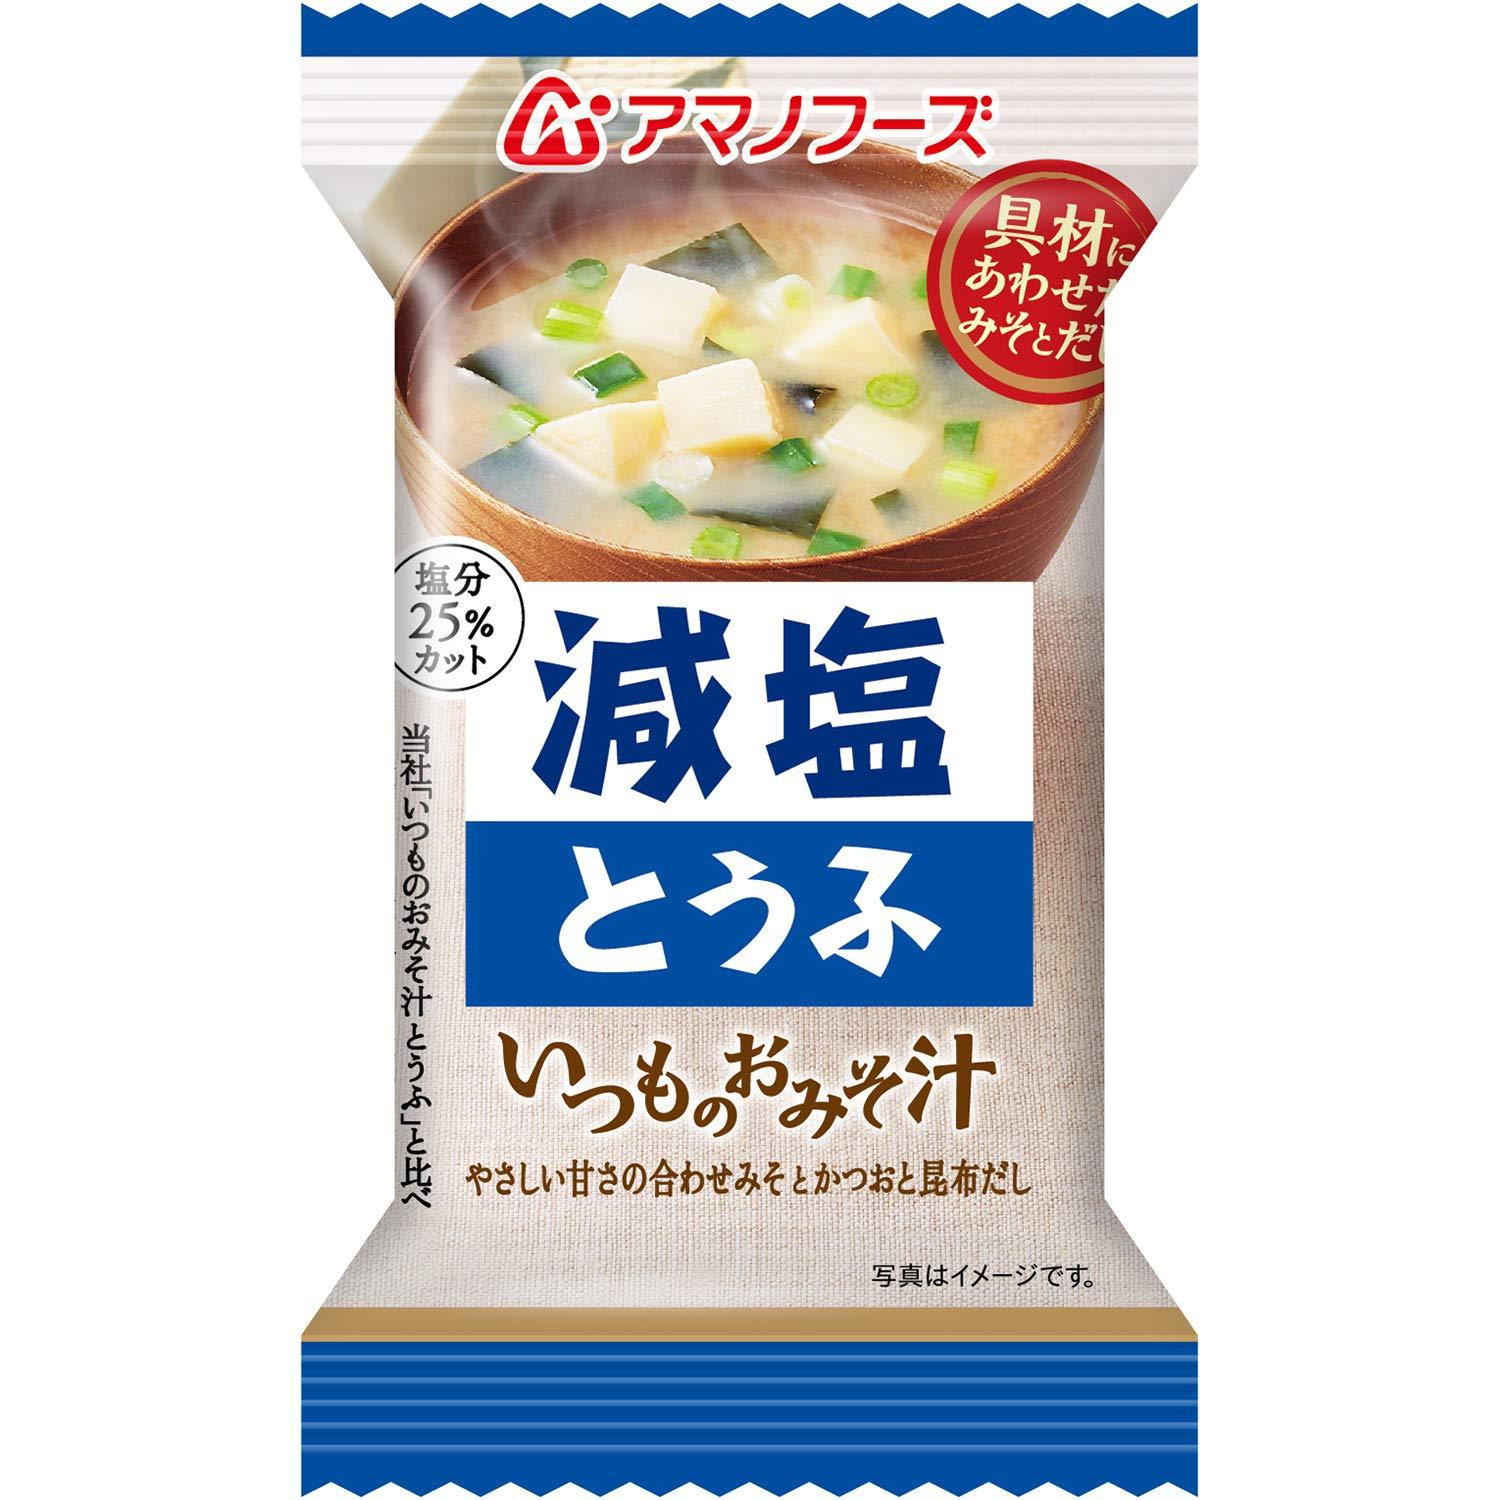 Amano Foods Freeze Dried Japanese Miso Soup Low Sodium 10 Servings